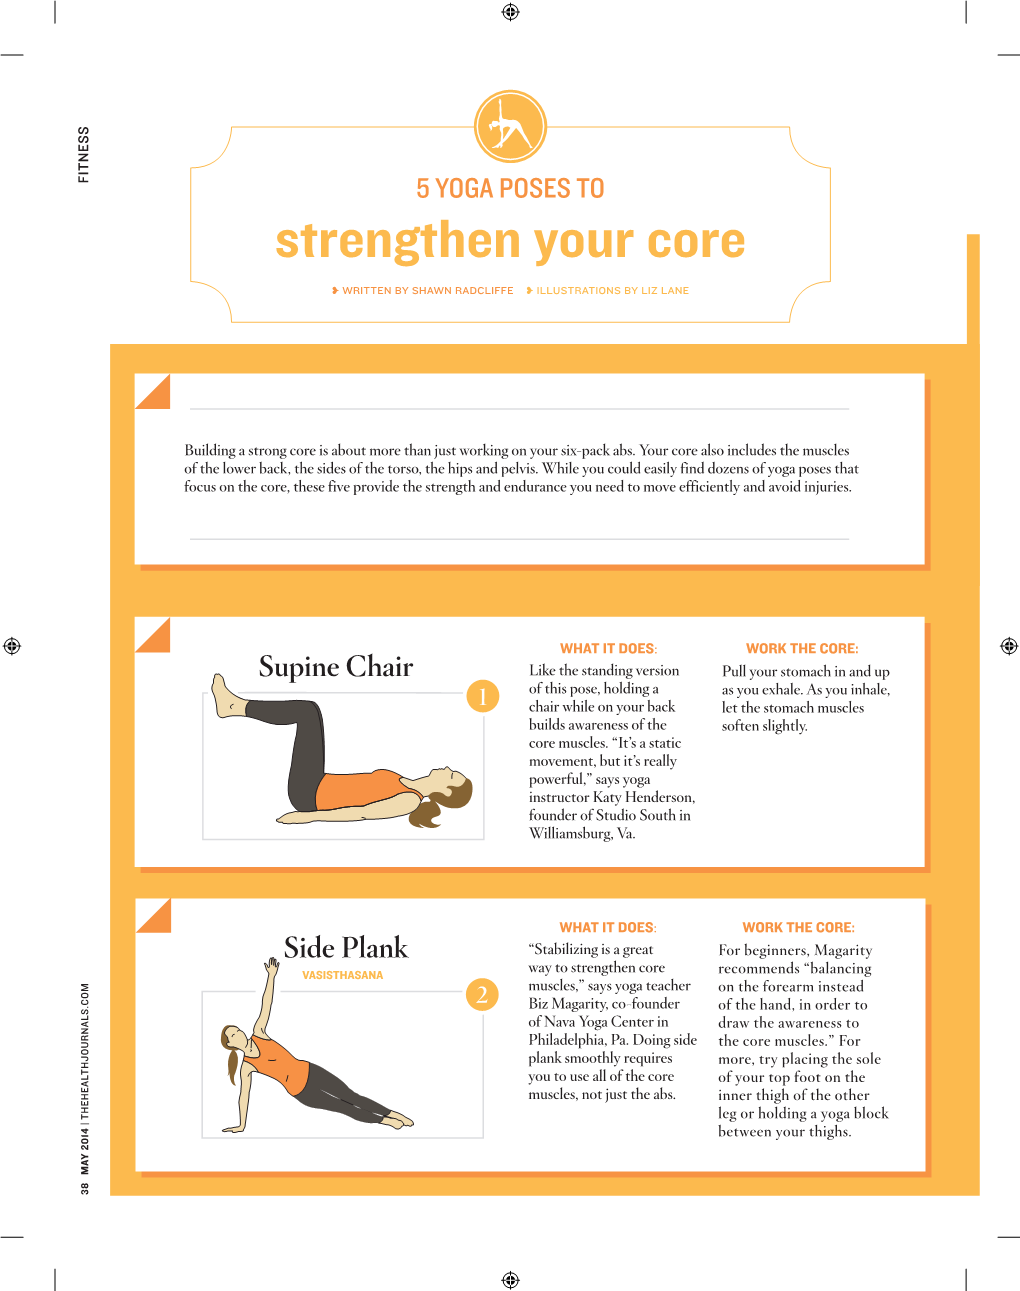 Strengthen Your Core Side Plank VASISTHASANA ❥ WRITTEN by SHAWN WRITTEN RADCLIFFE 5 YOGA POSESTO 2 1 ❥ Muscles, Not Just Theabs